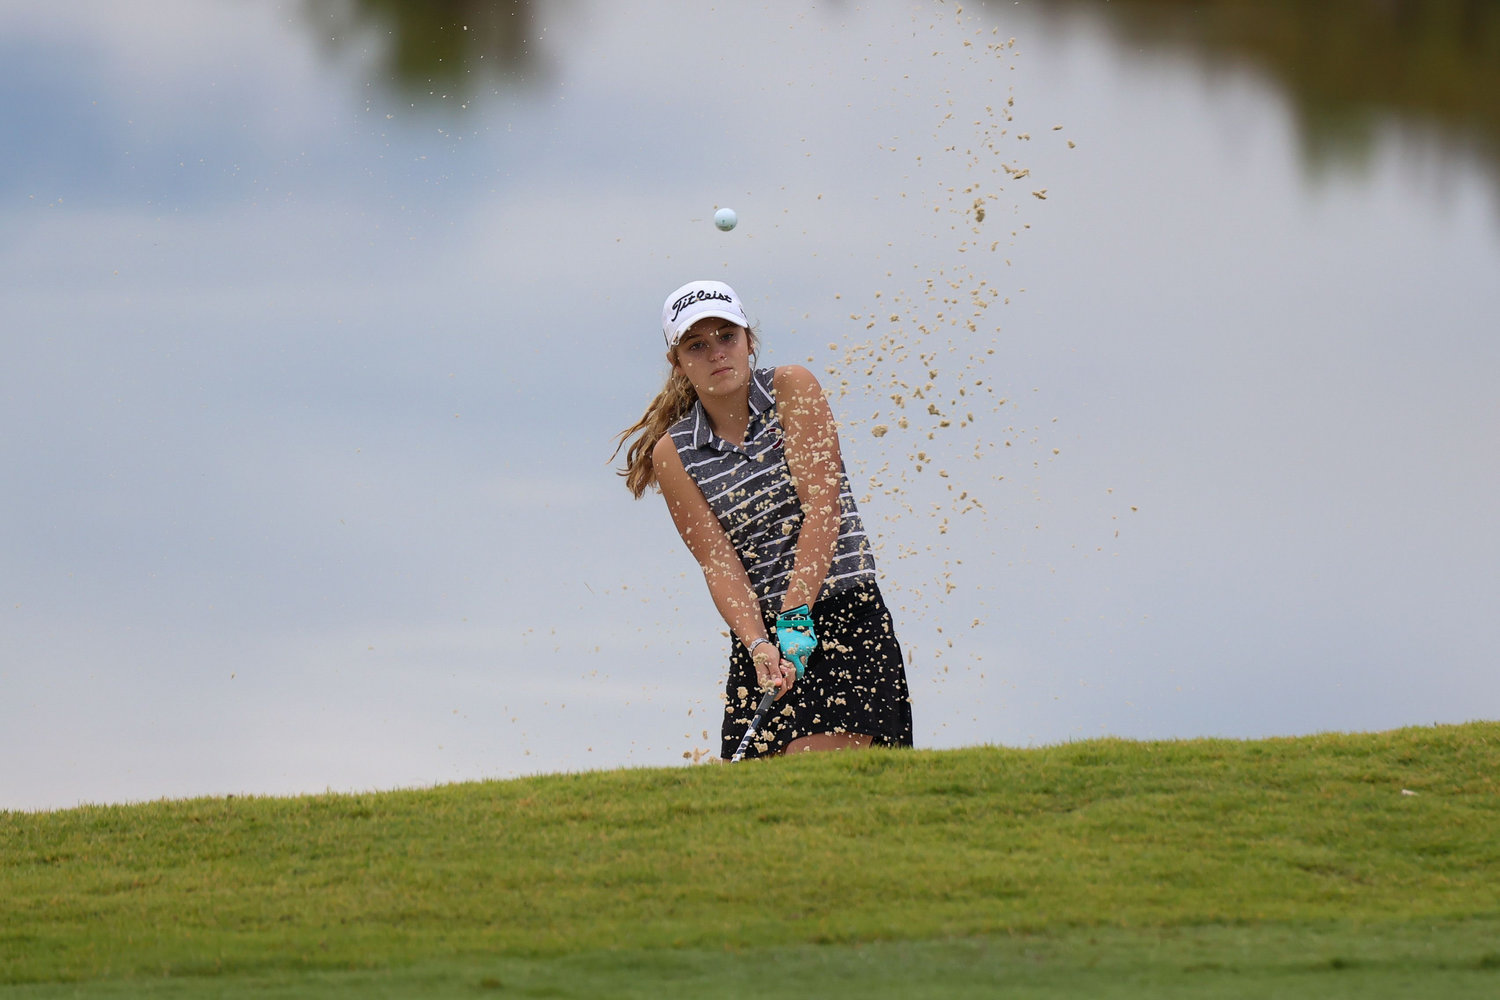 Annabelle Mulliniks hits out of a bunker at the scenic Sevierville Golf Club in East Tennessee.